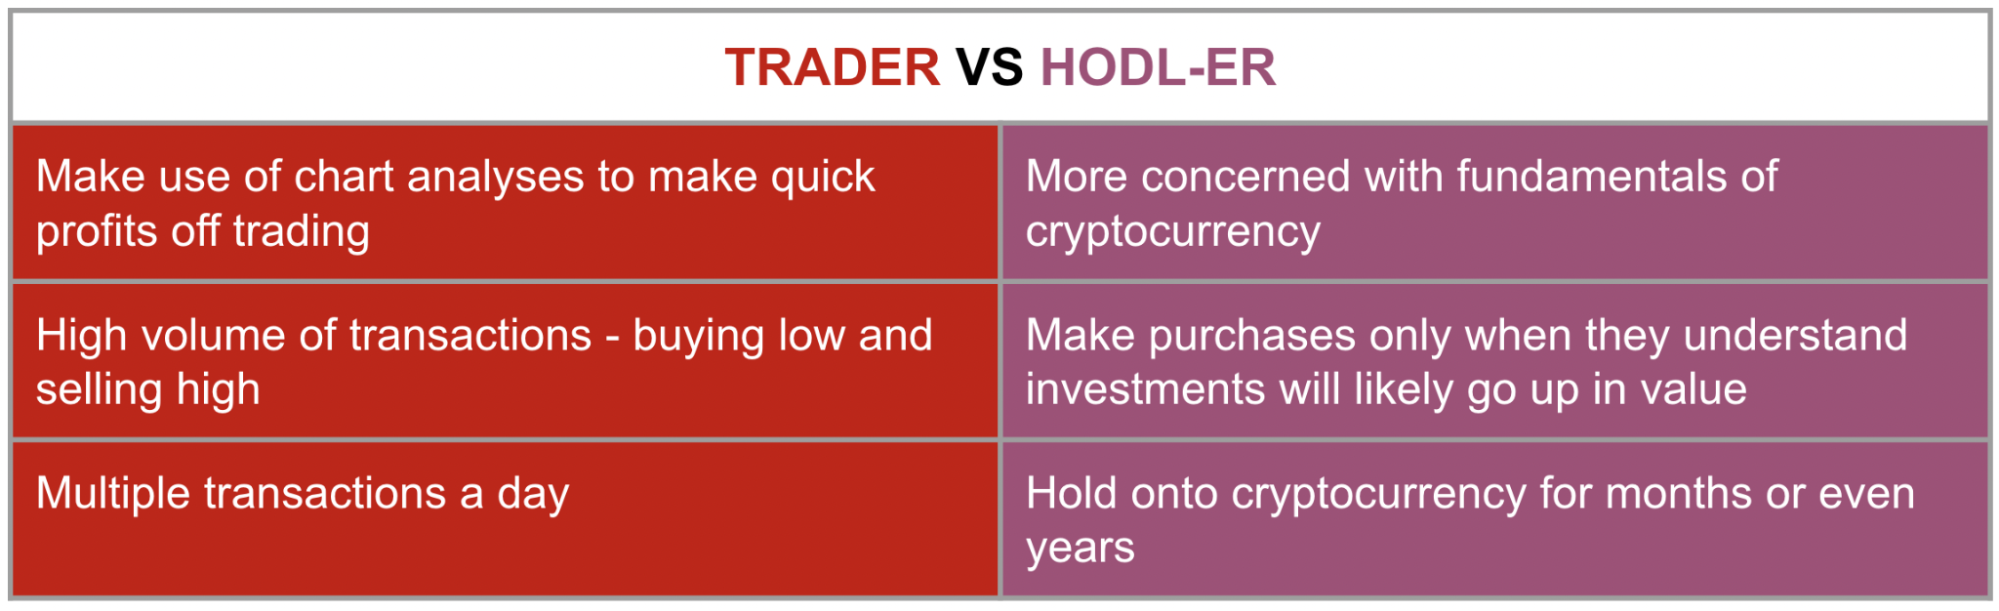 Coinhako - difference between a trader and HODL-er